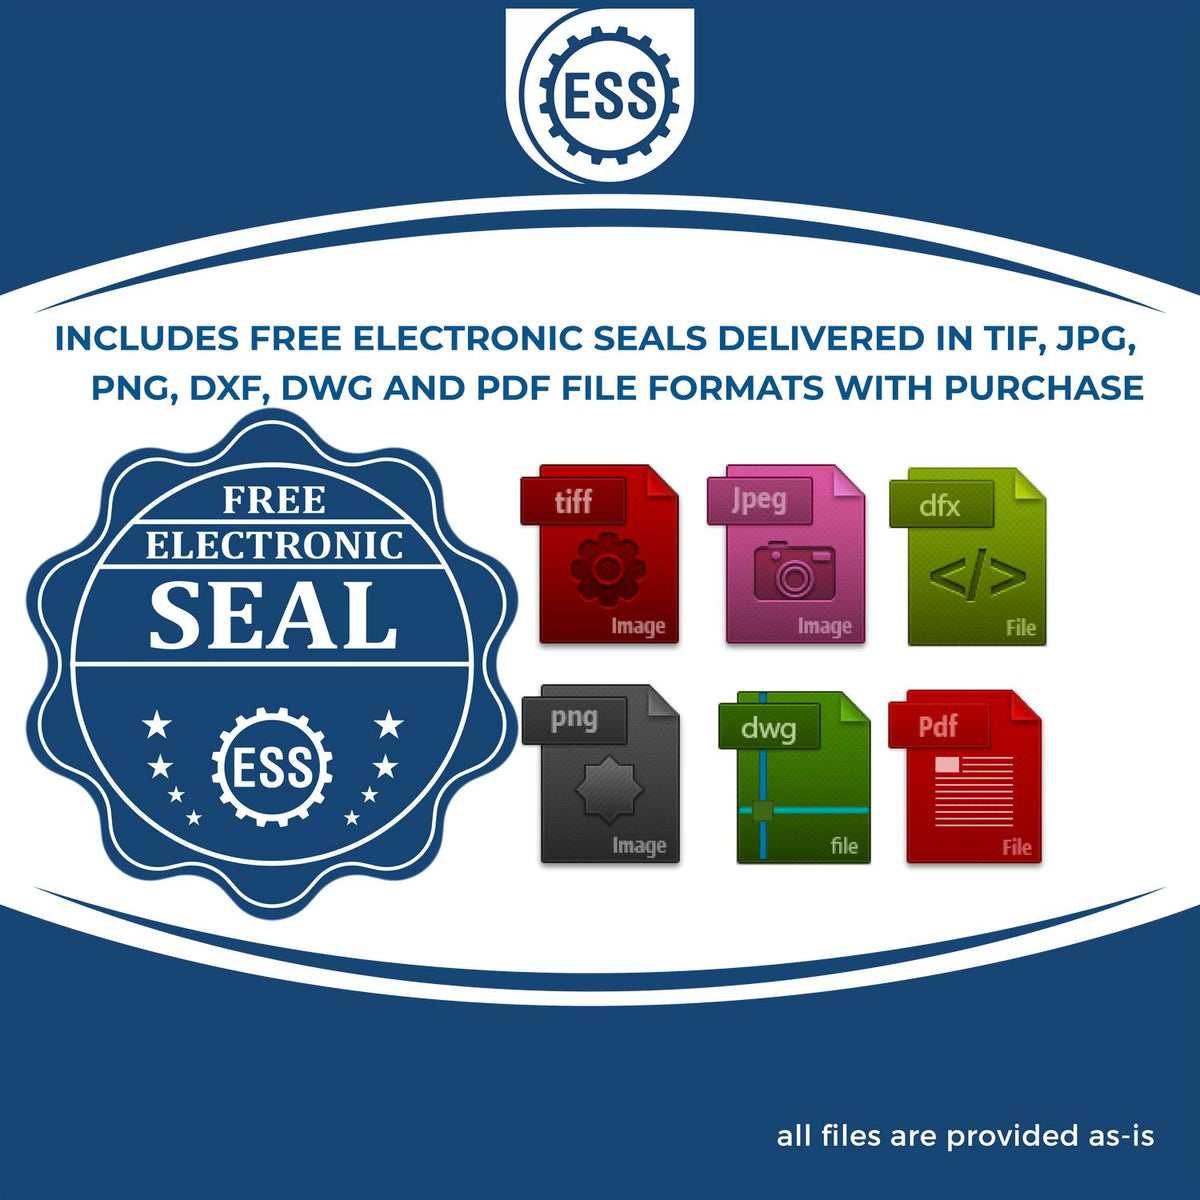 An infographic for the free electronic seal for the Iowa Professional Geologist Seal Stamp illustrating the different file type icons such as DXF, DWG, TIF, JPG and PNG.